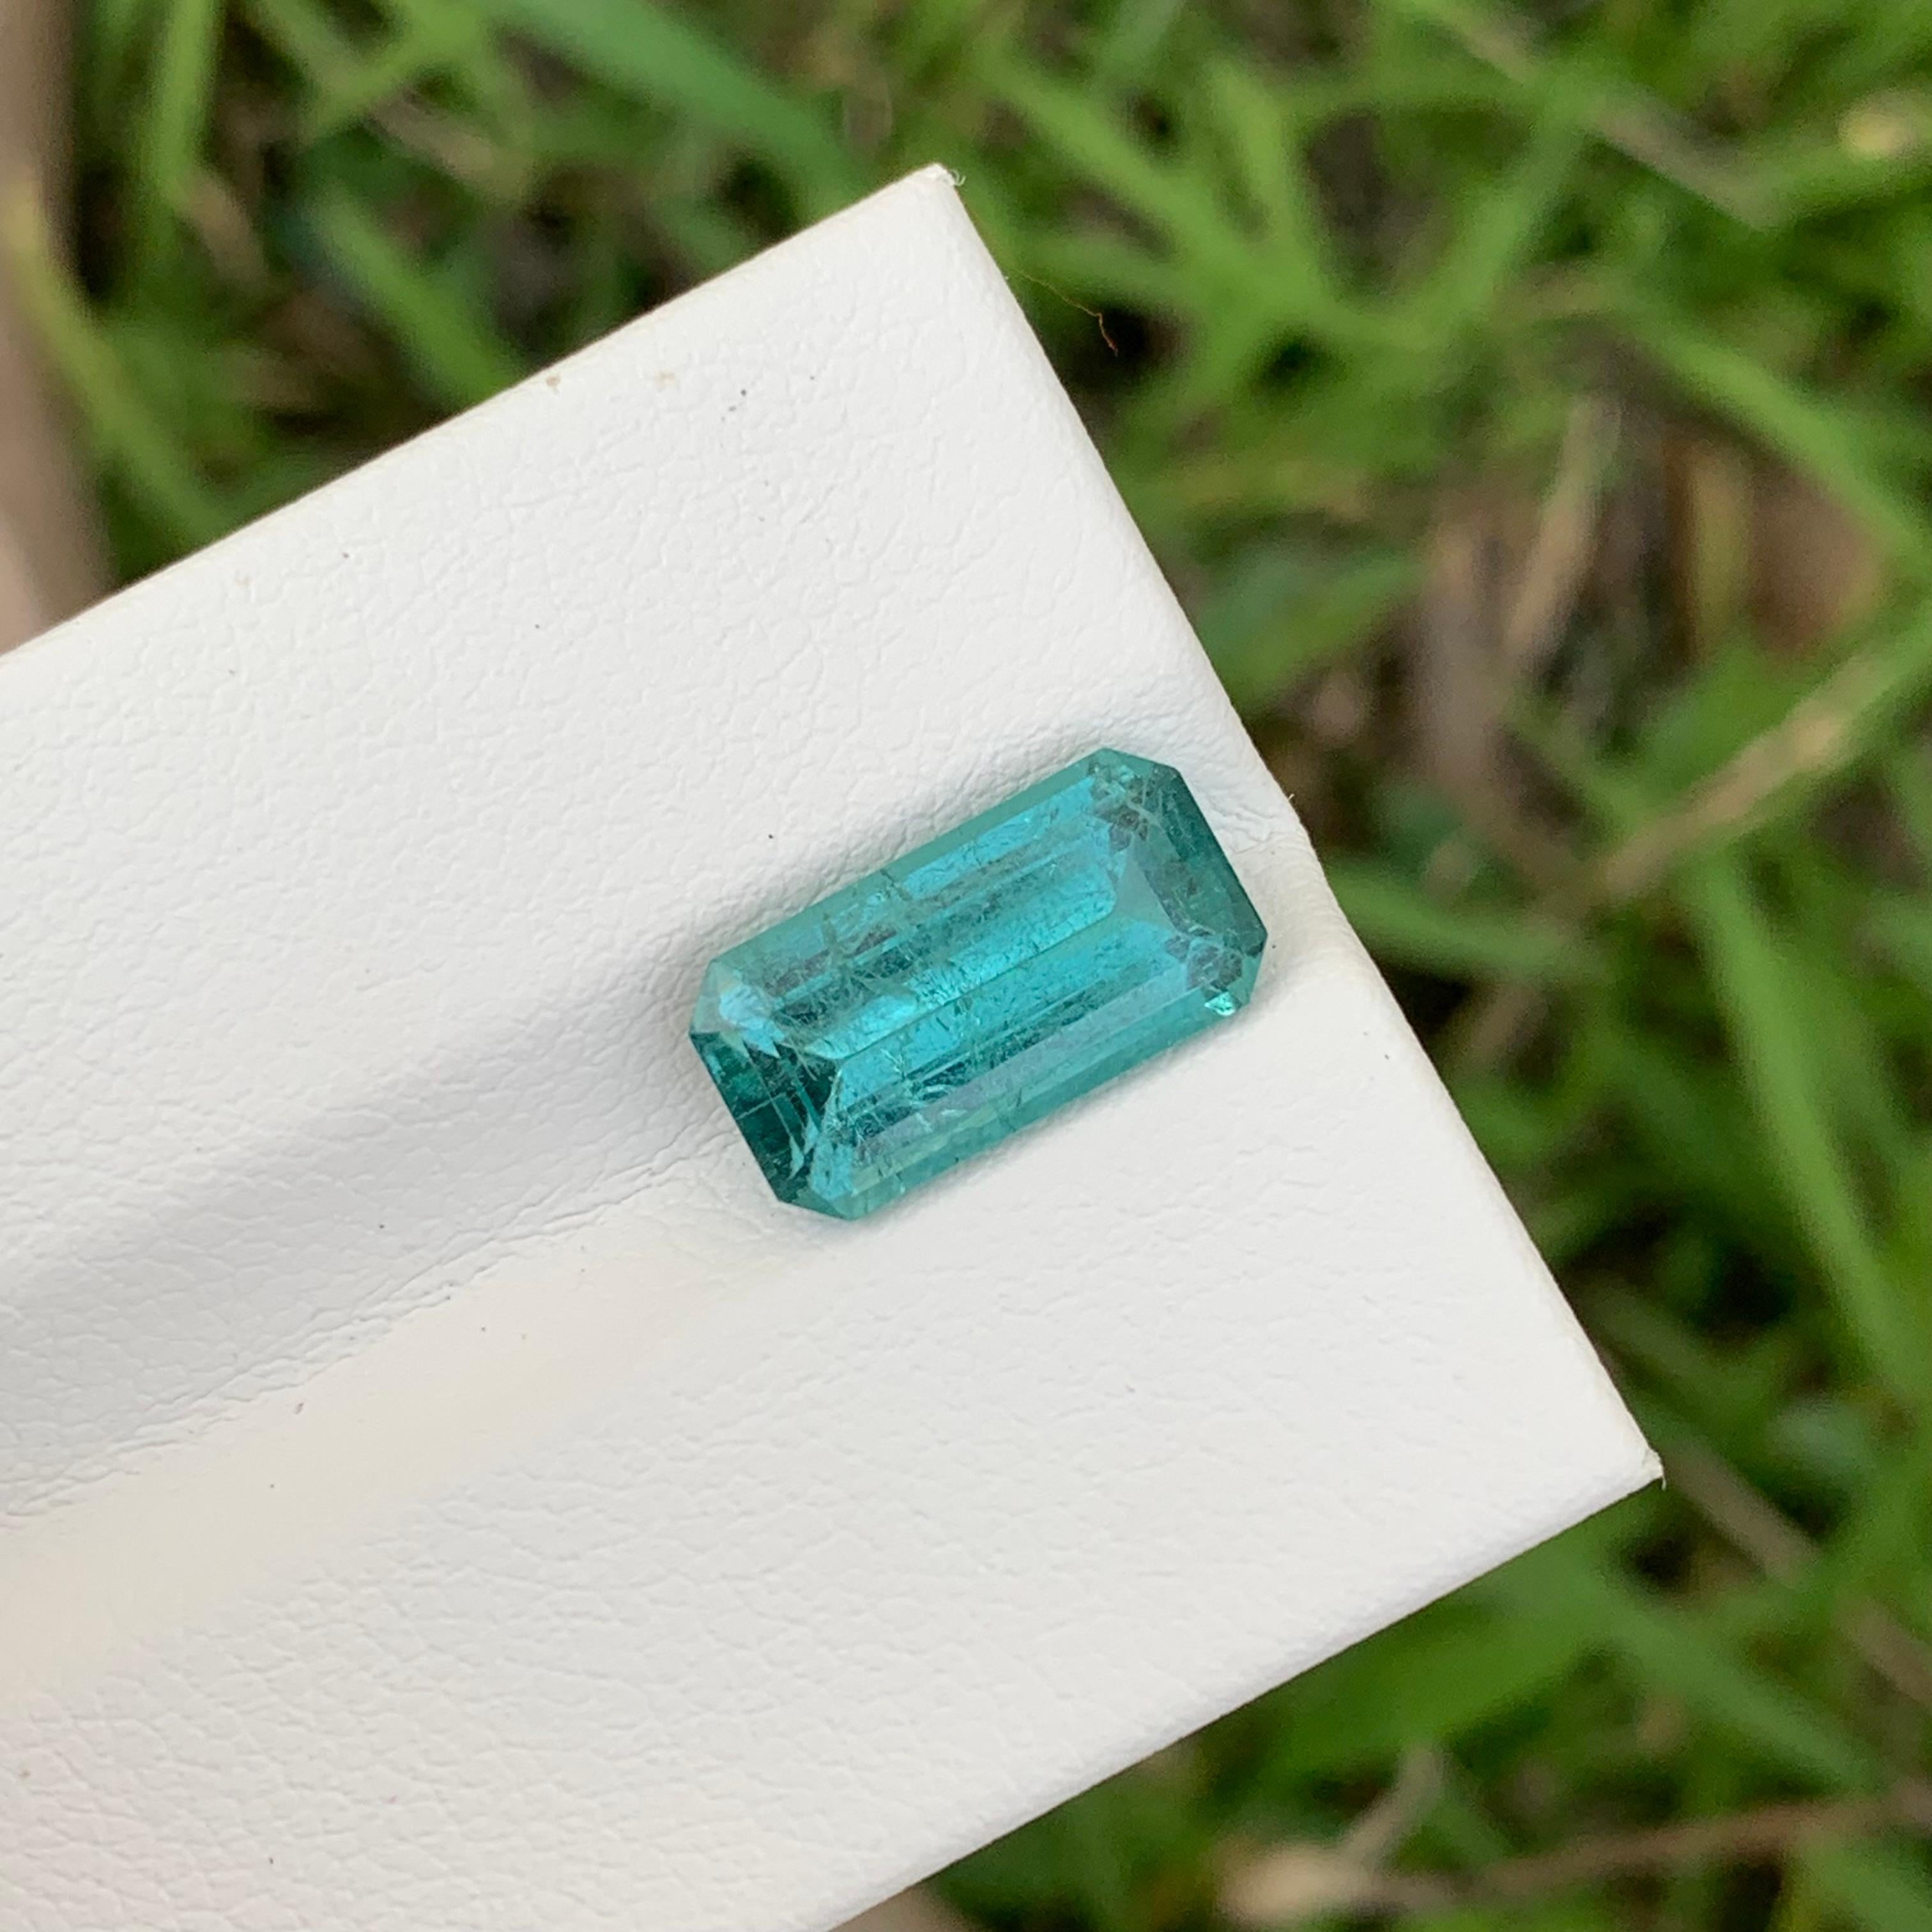 Loose Seafoam Tourmaline

Weight: 3.20 Carats
Dimension: 12.5 x 6.6 x 4.4 Mm
Colour: Greenish Blue 
Origin: Afghanistan
Certificate: On Demand
Treatment: Non

Tourmaline is a captivating gemstone known for its remarkable variety of colors, making it